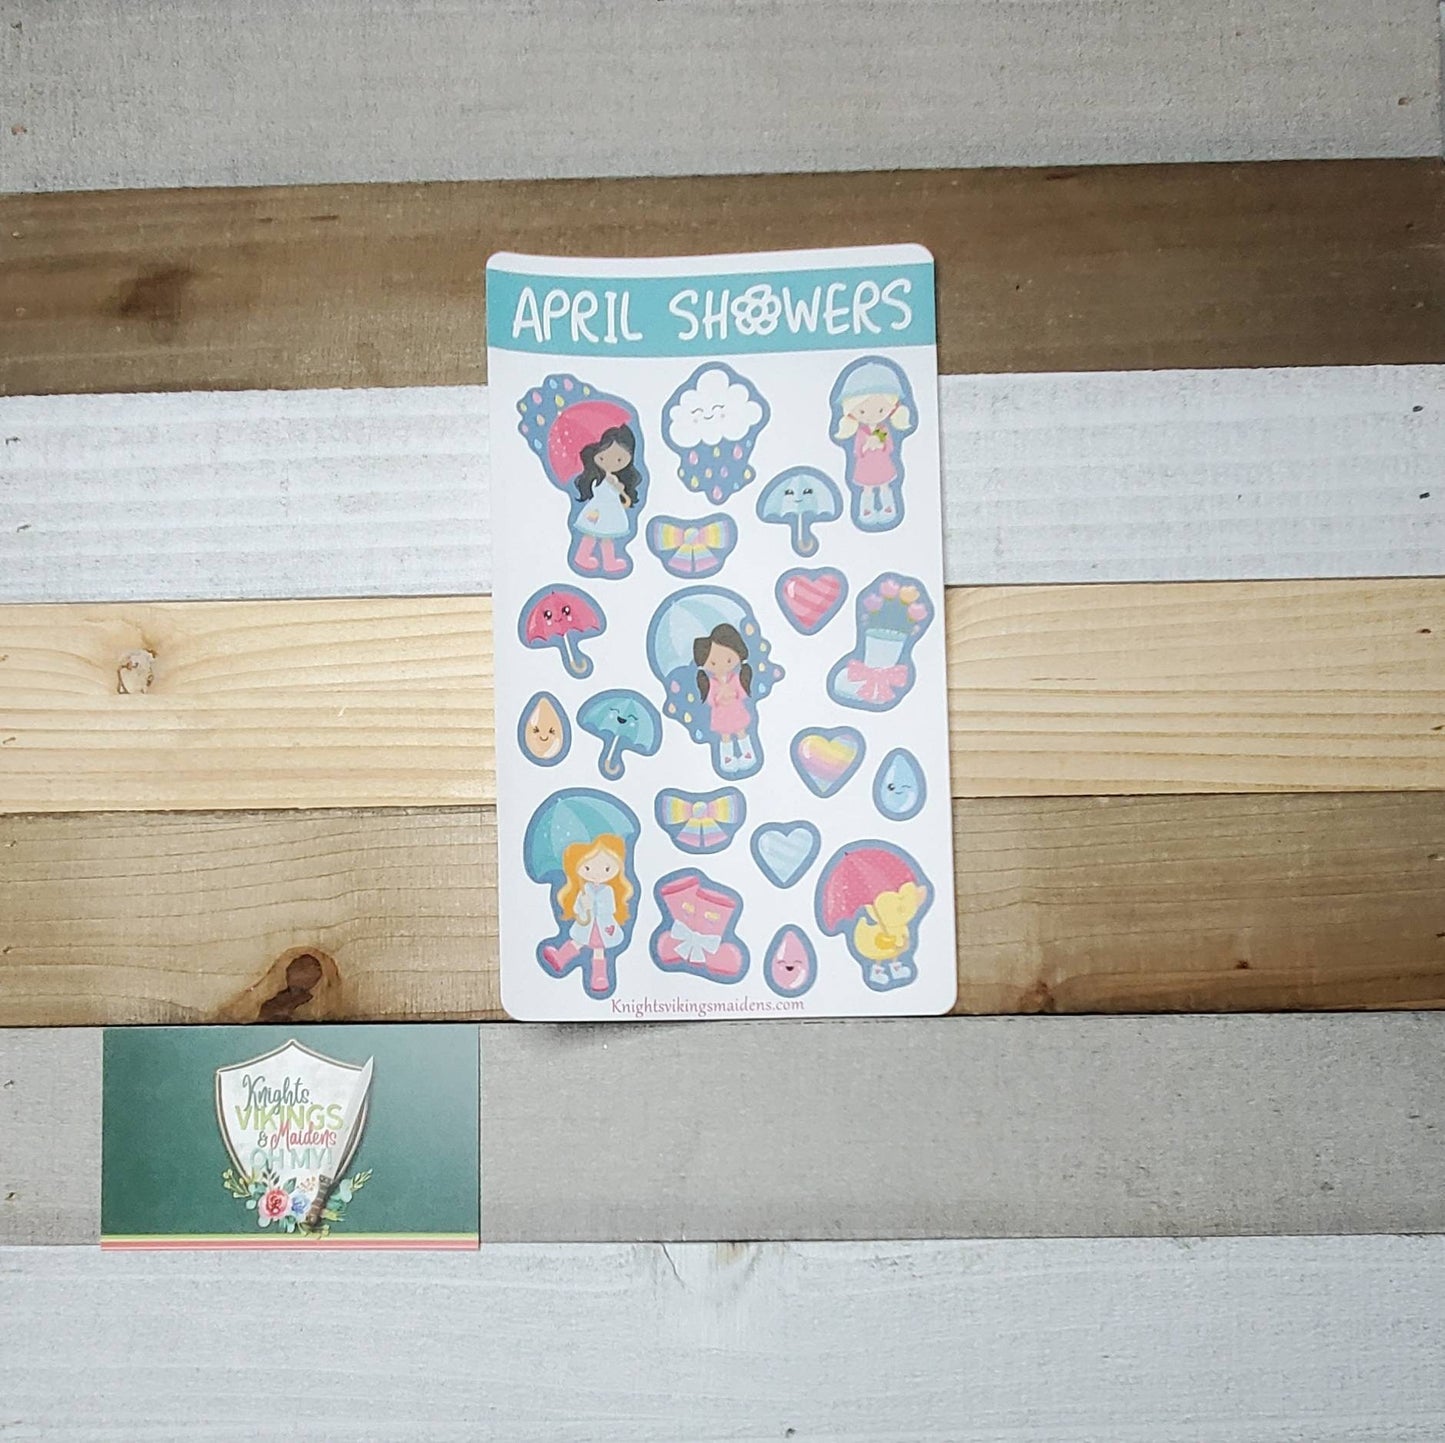 April Showers Sticker Sheet. Wet Weather Stickers Featuring Little Girls in Rainboots Playing in the Rain. April Bullet Journal Stickers.